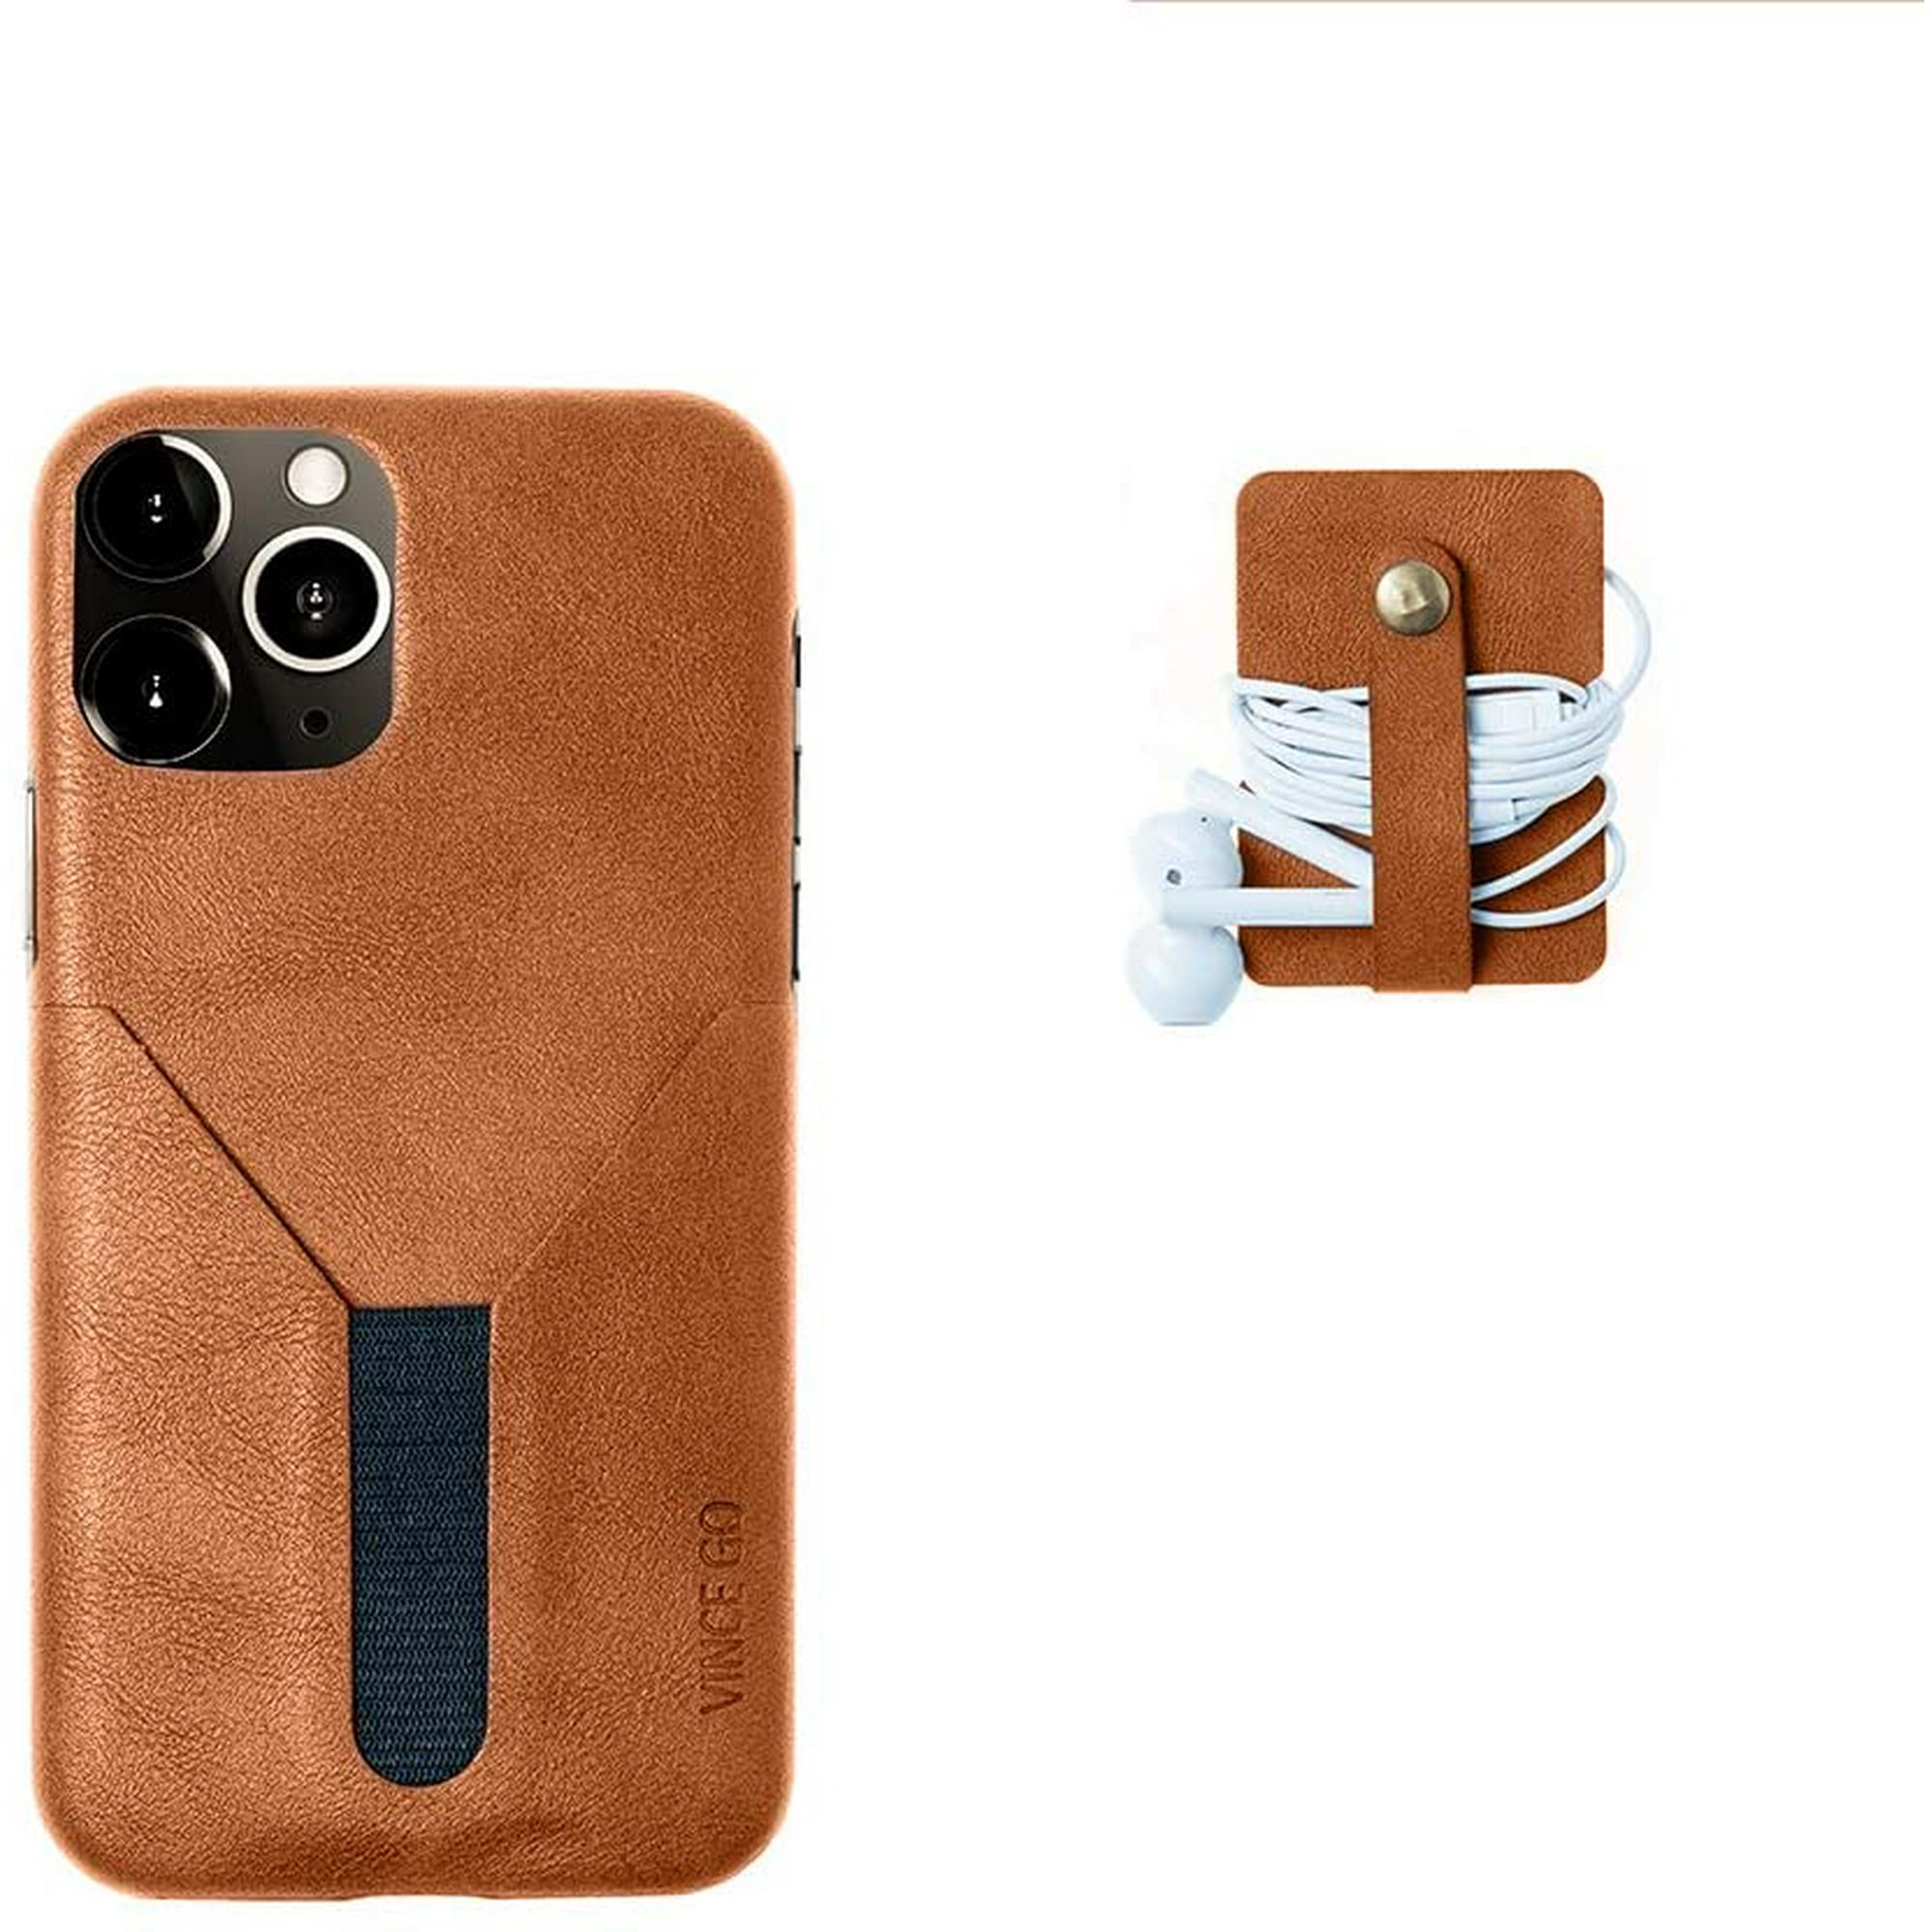 Vince Go Iphone 11 Pro Max Leather Case With Card Holder Wireless Charging Compatiable Iphone 11 Wallet Case Iphone 11 Walmart Canada